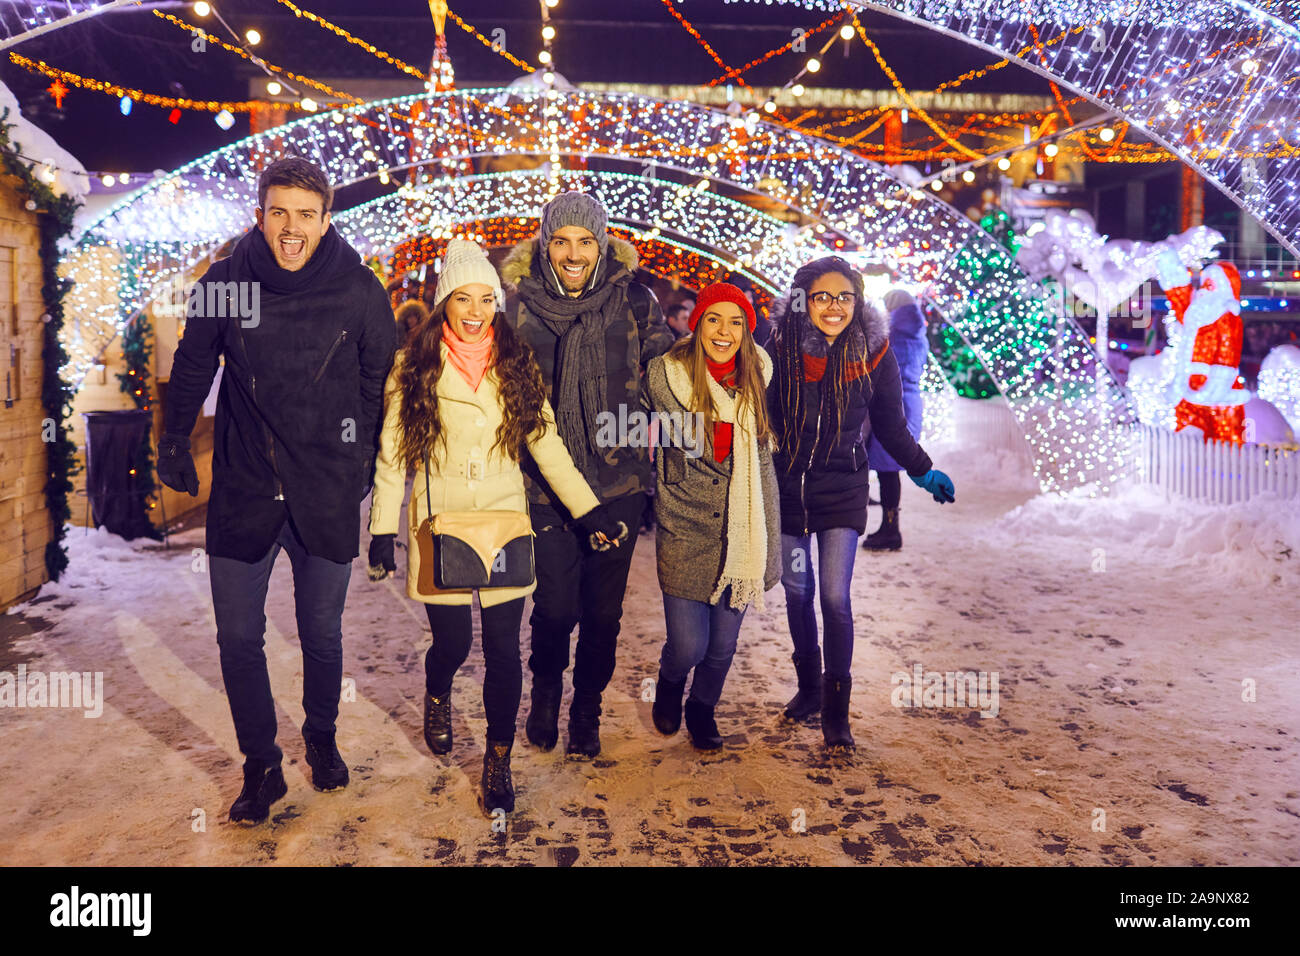 Friends have fun walking on Christmas streets at night. Stock Photo